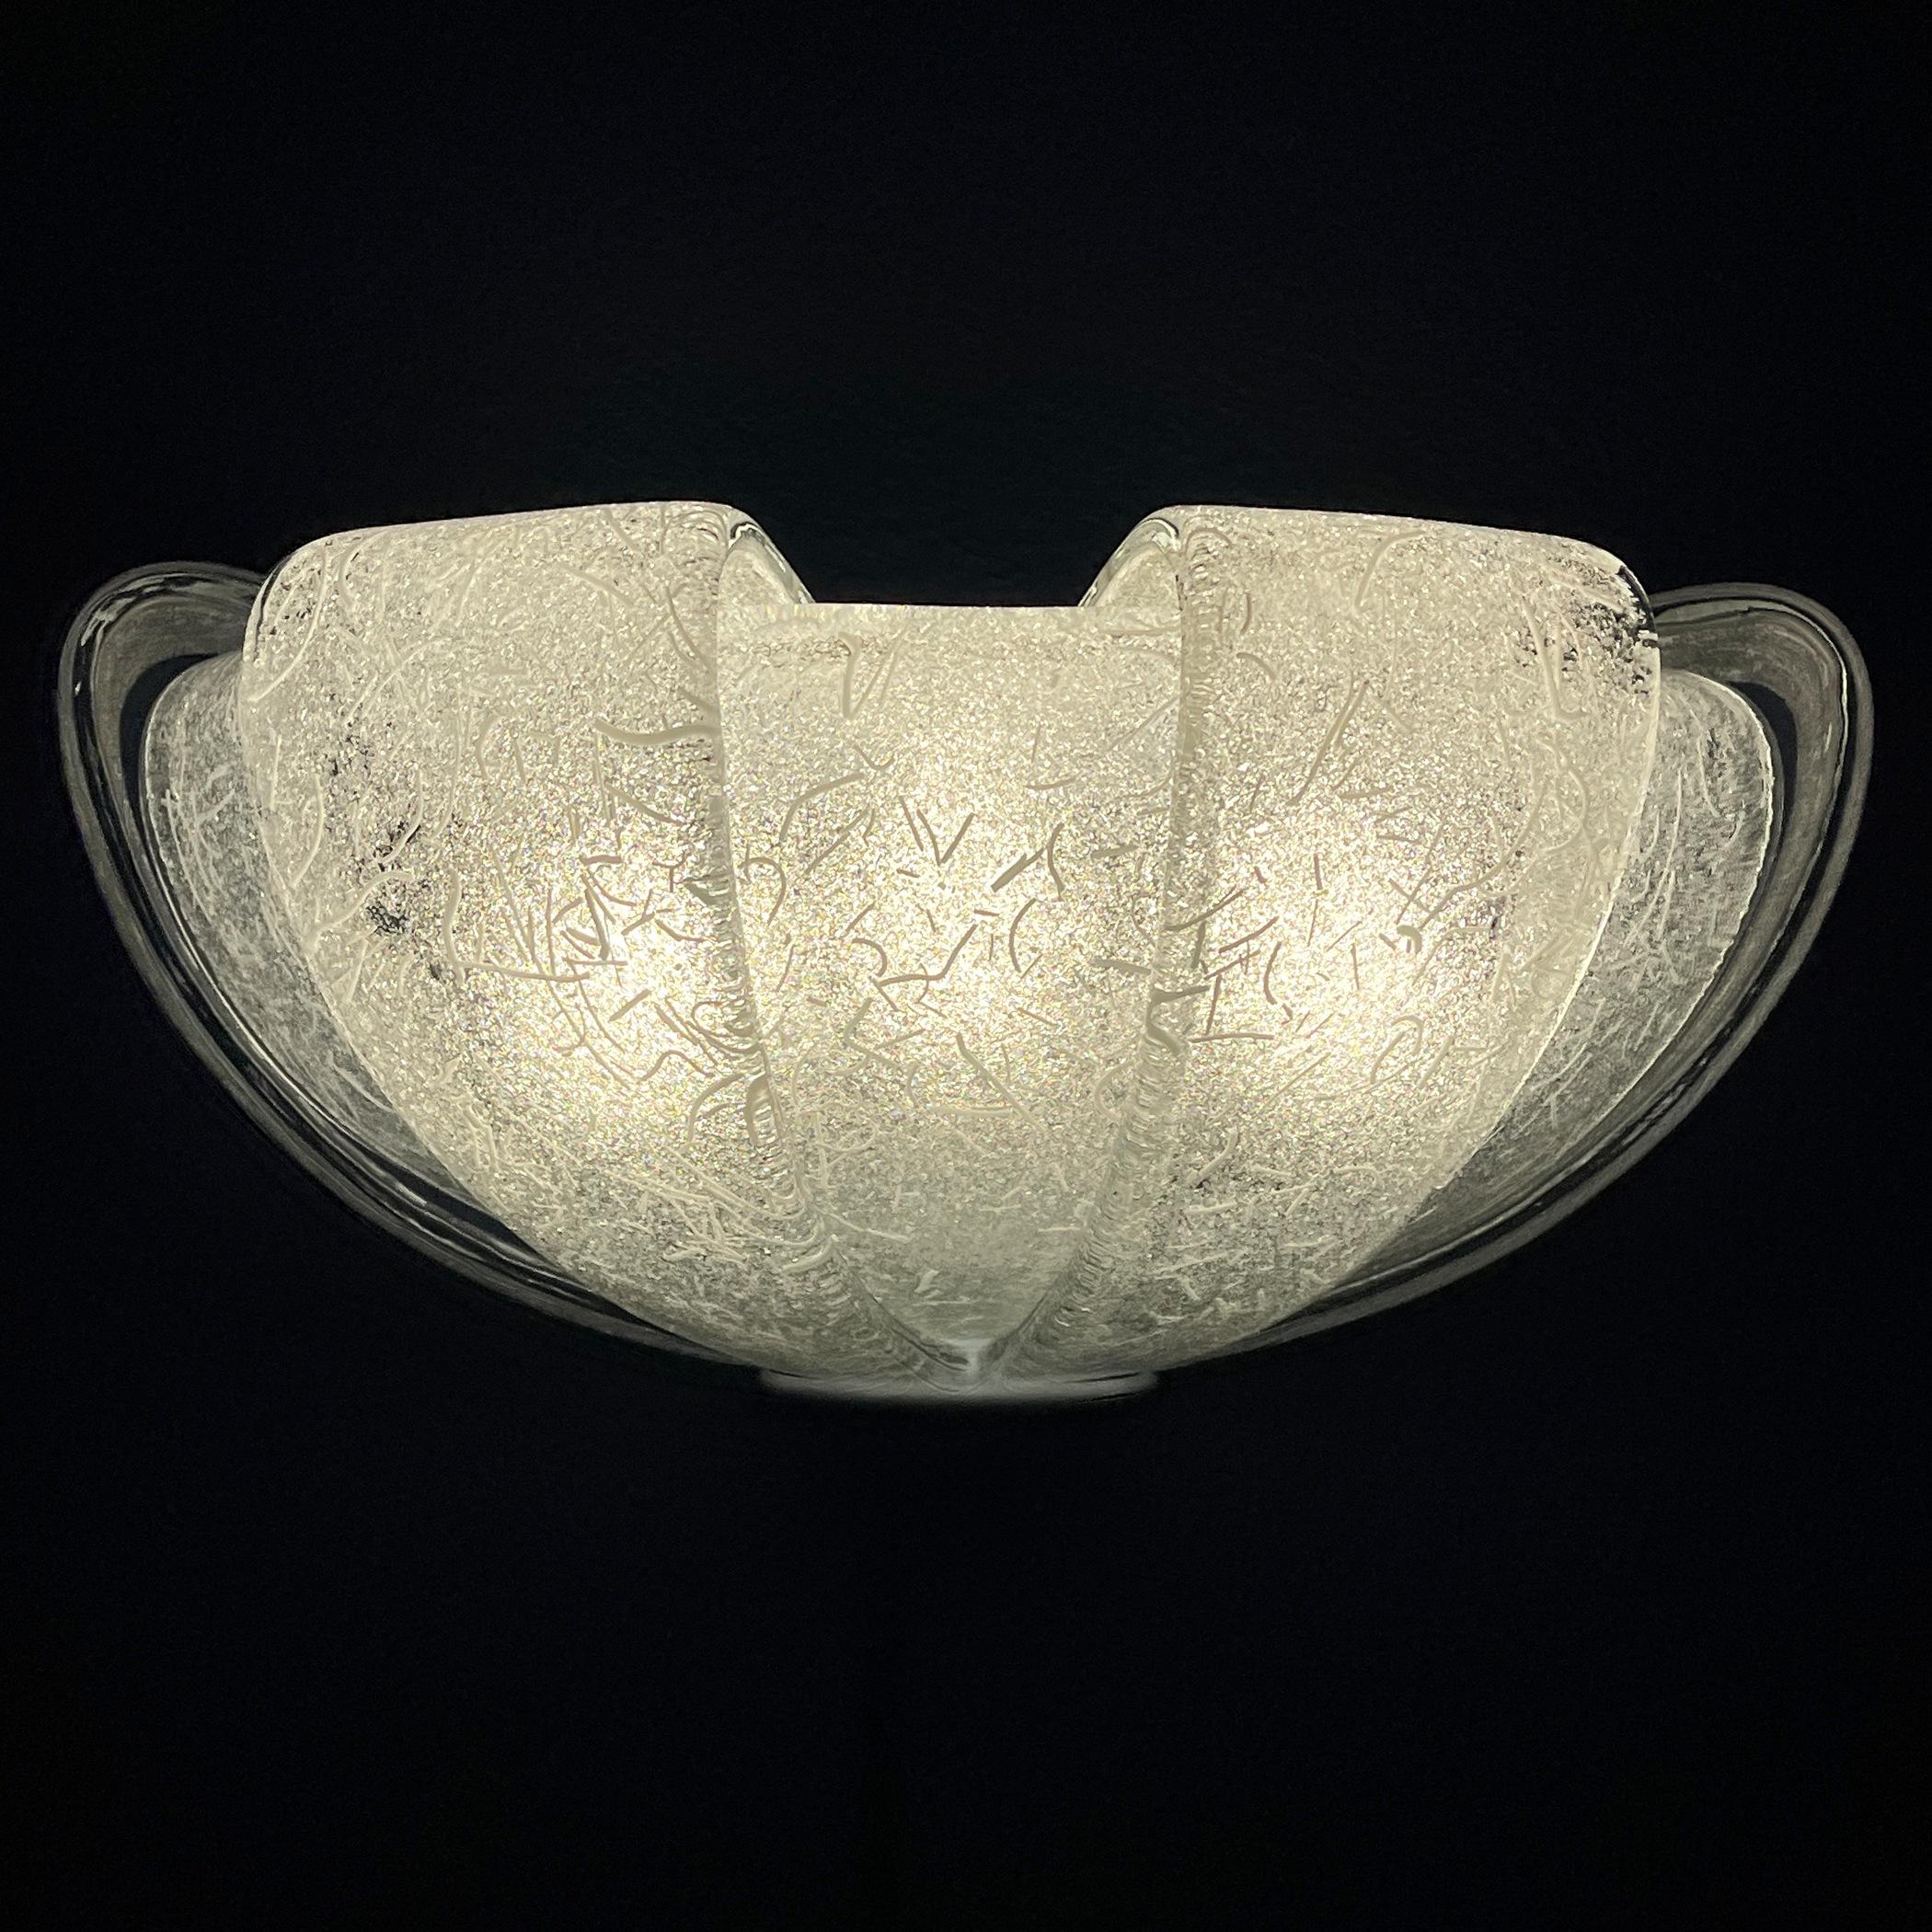 Vintage white Murano wall lamp with petals-shaped design, made in Italy in the 1980s. This Mid-Century Modern (MCM) Murano sconce features an elegant petals-like structure and accommodates three E14 bulbs.

It is in very good vintage condition,